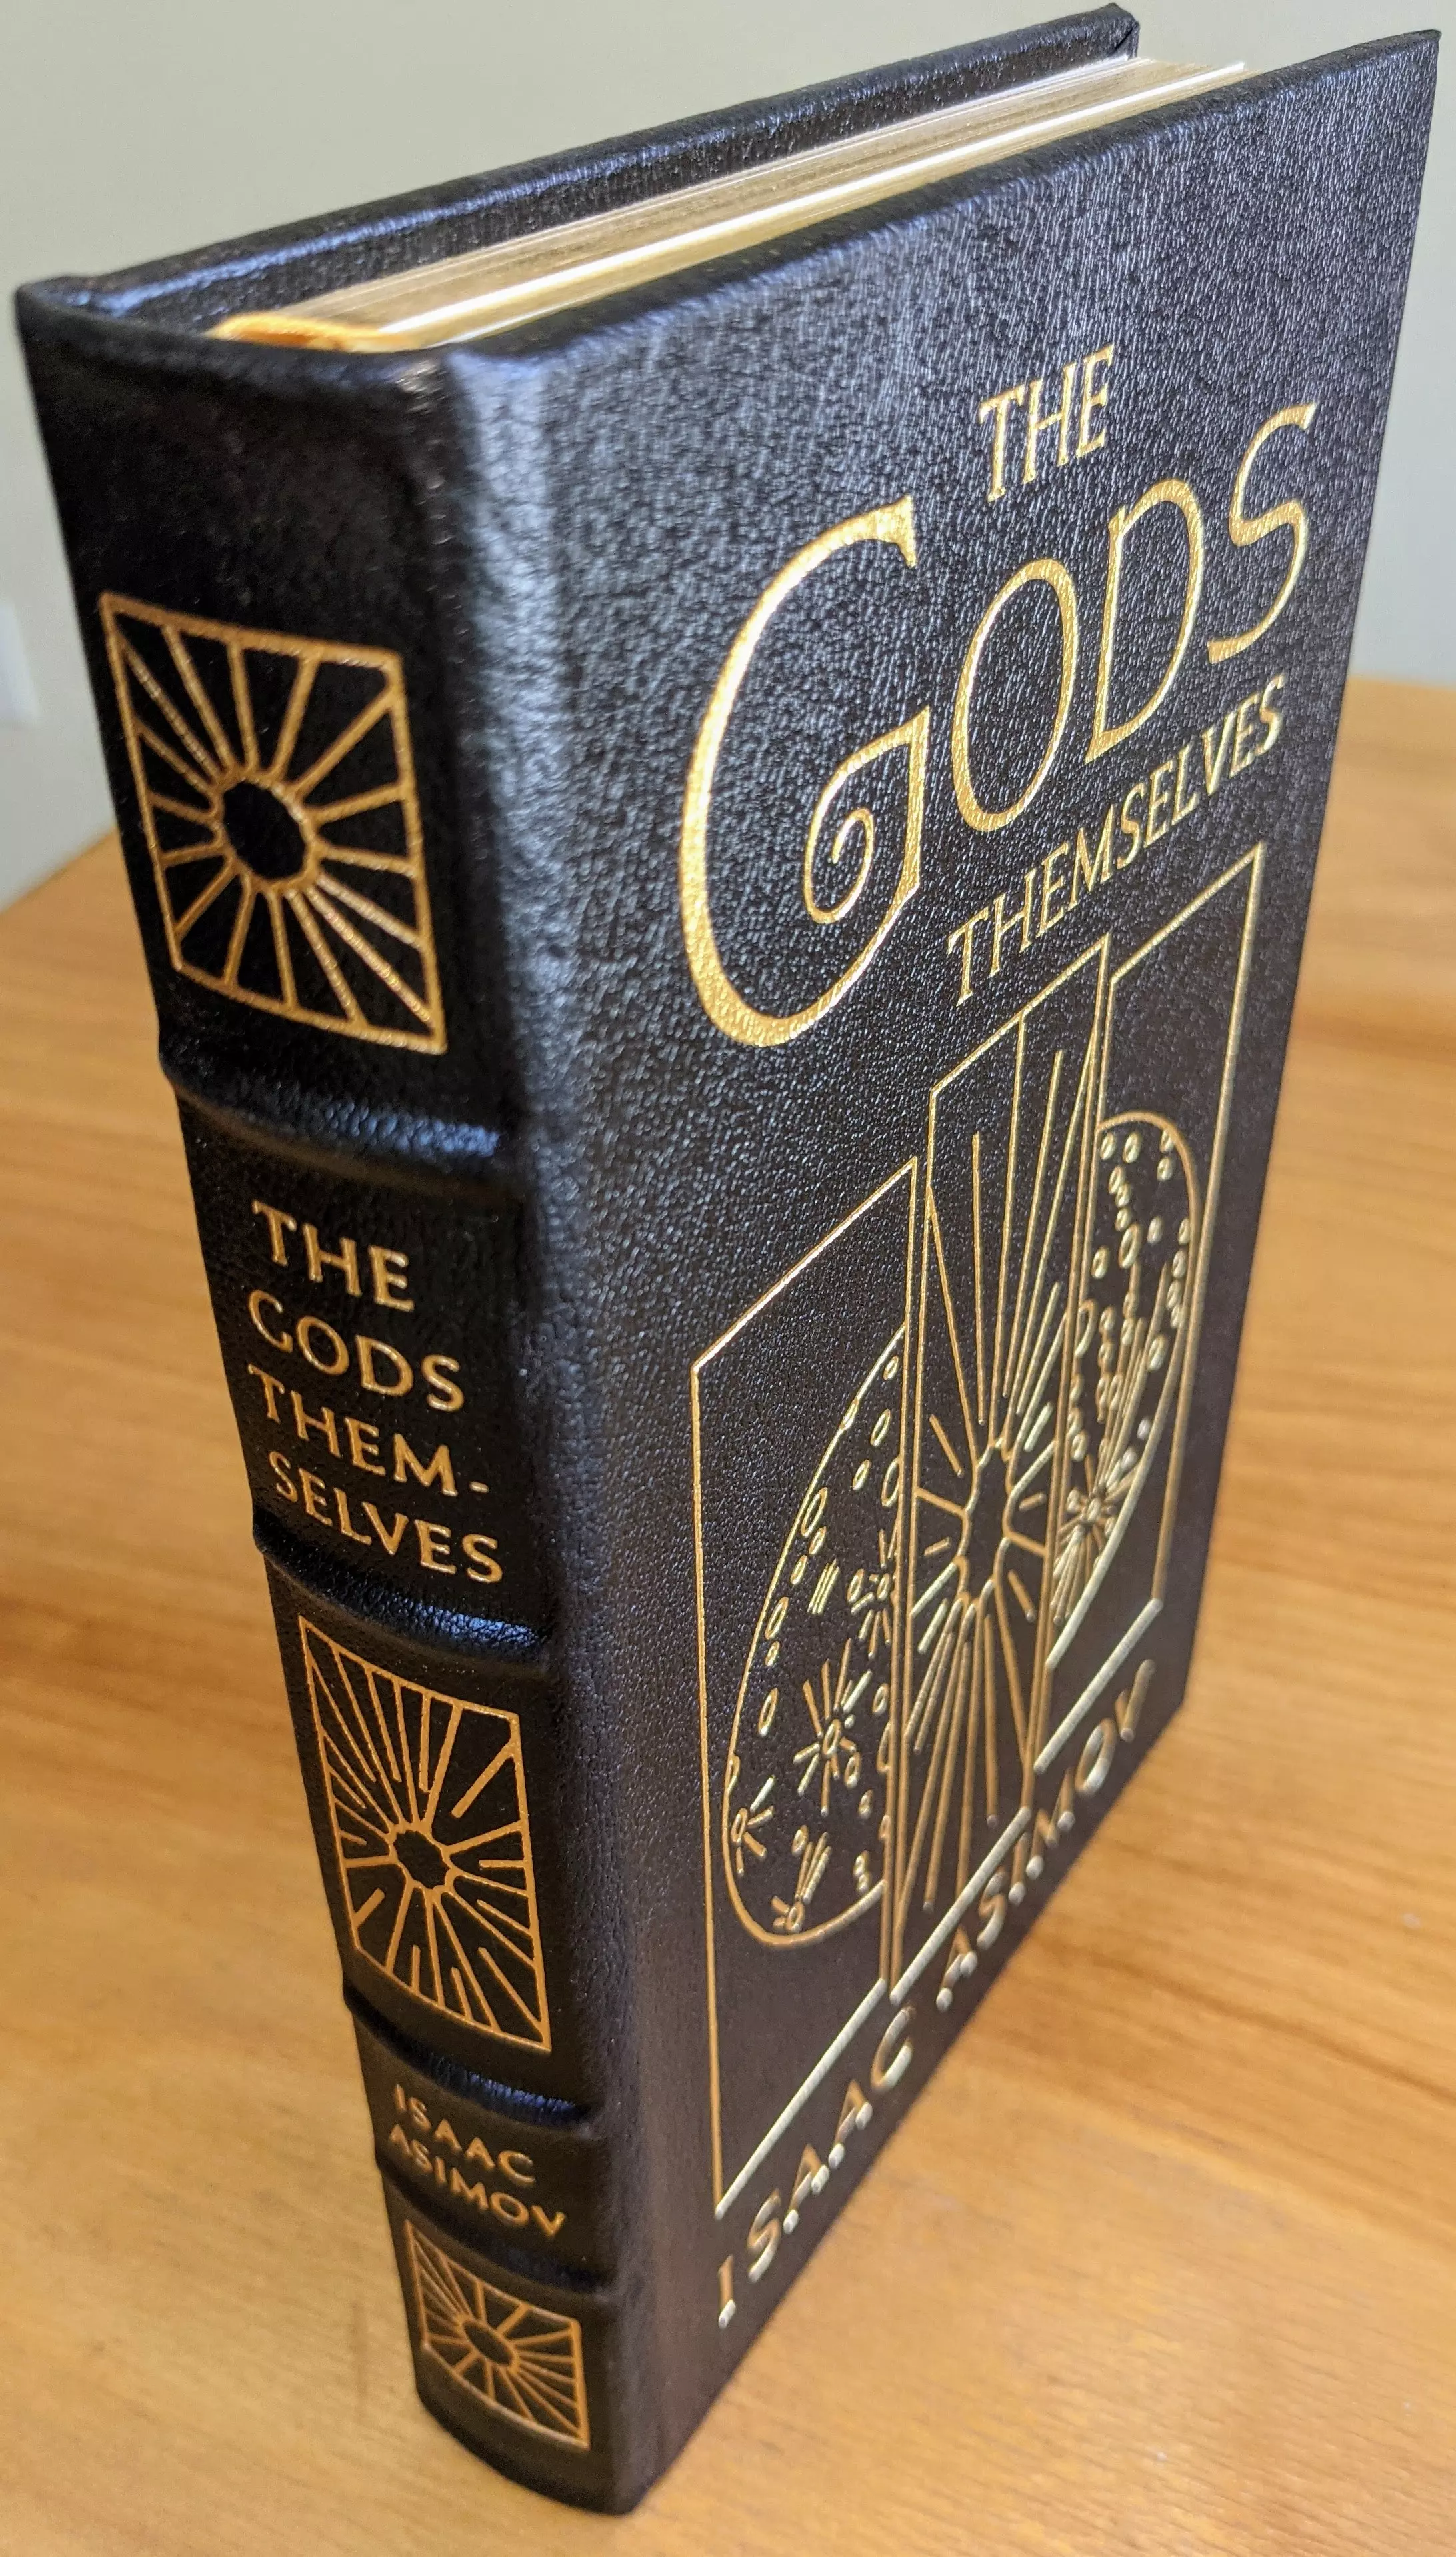 Stunning Black Leather Bound hardback book with hubbed spine, cover artwork in 22kt gold, printed on archival paper with gold gilded edges, smyth sewing & concealed muslin joints
	  - original artwork by Unknown